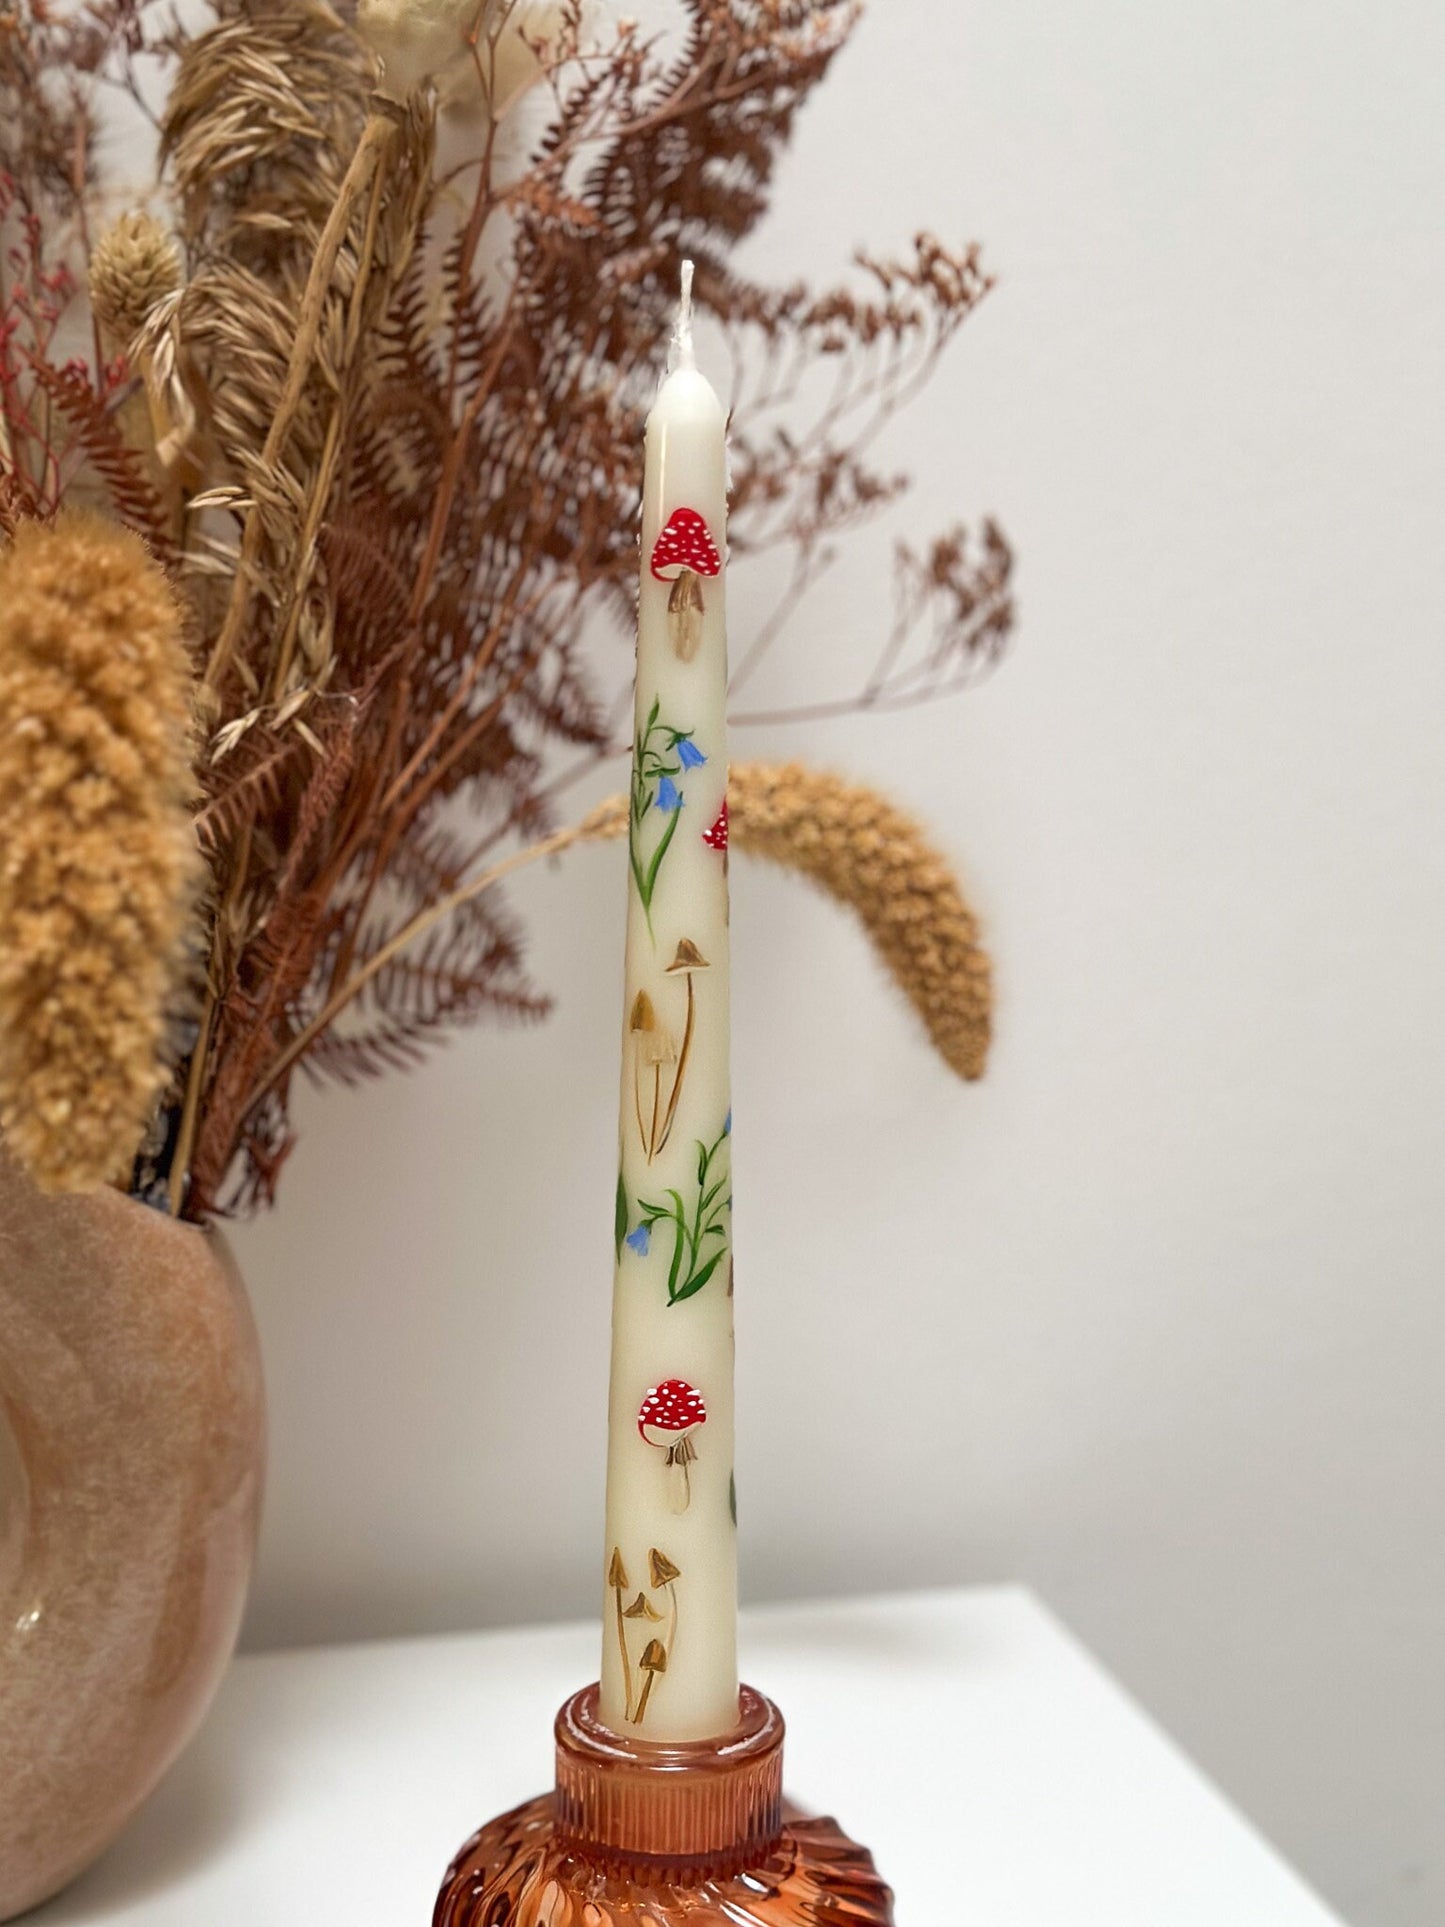 Autumn Wild Flowers and Mushrooms Hand Painted Candle